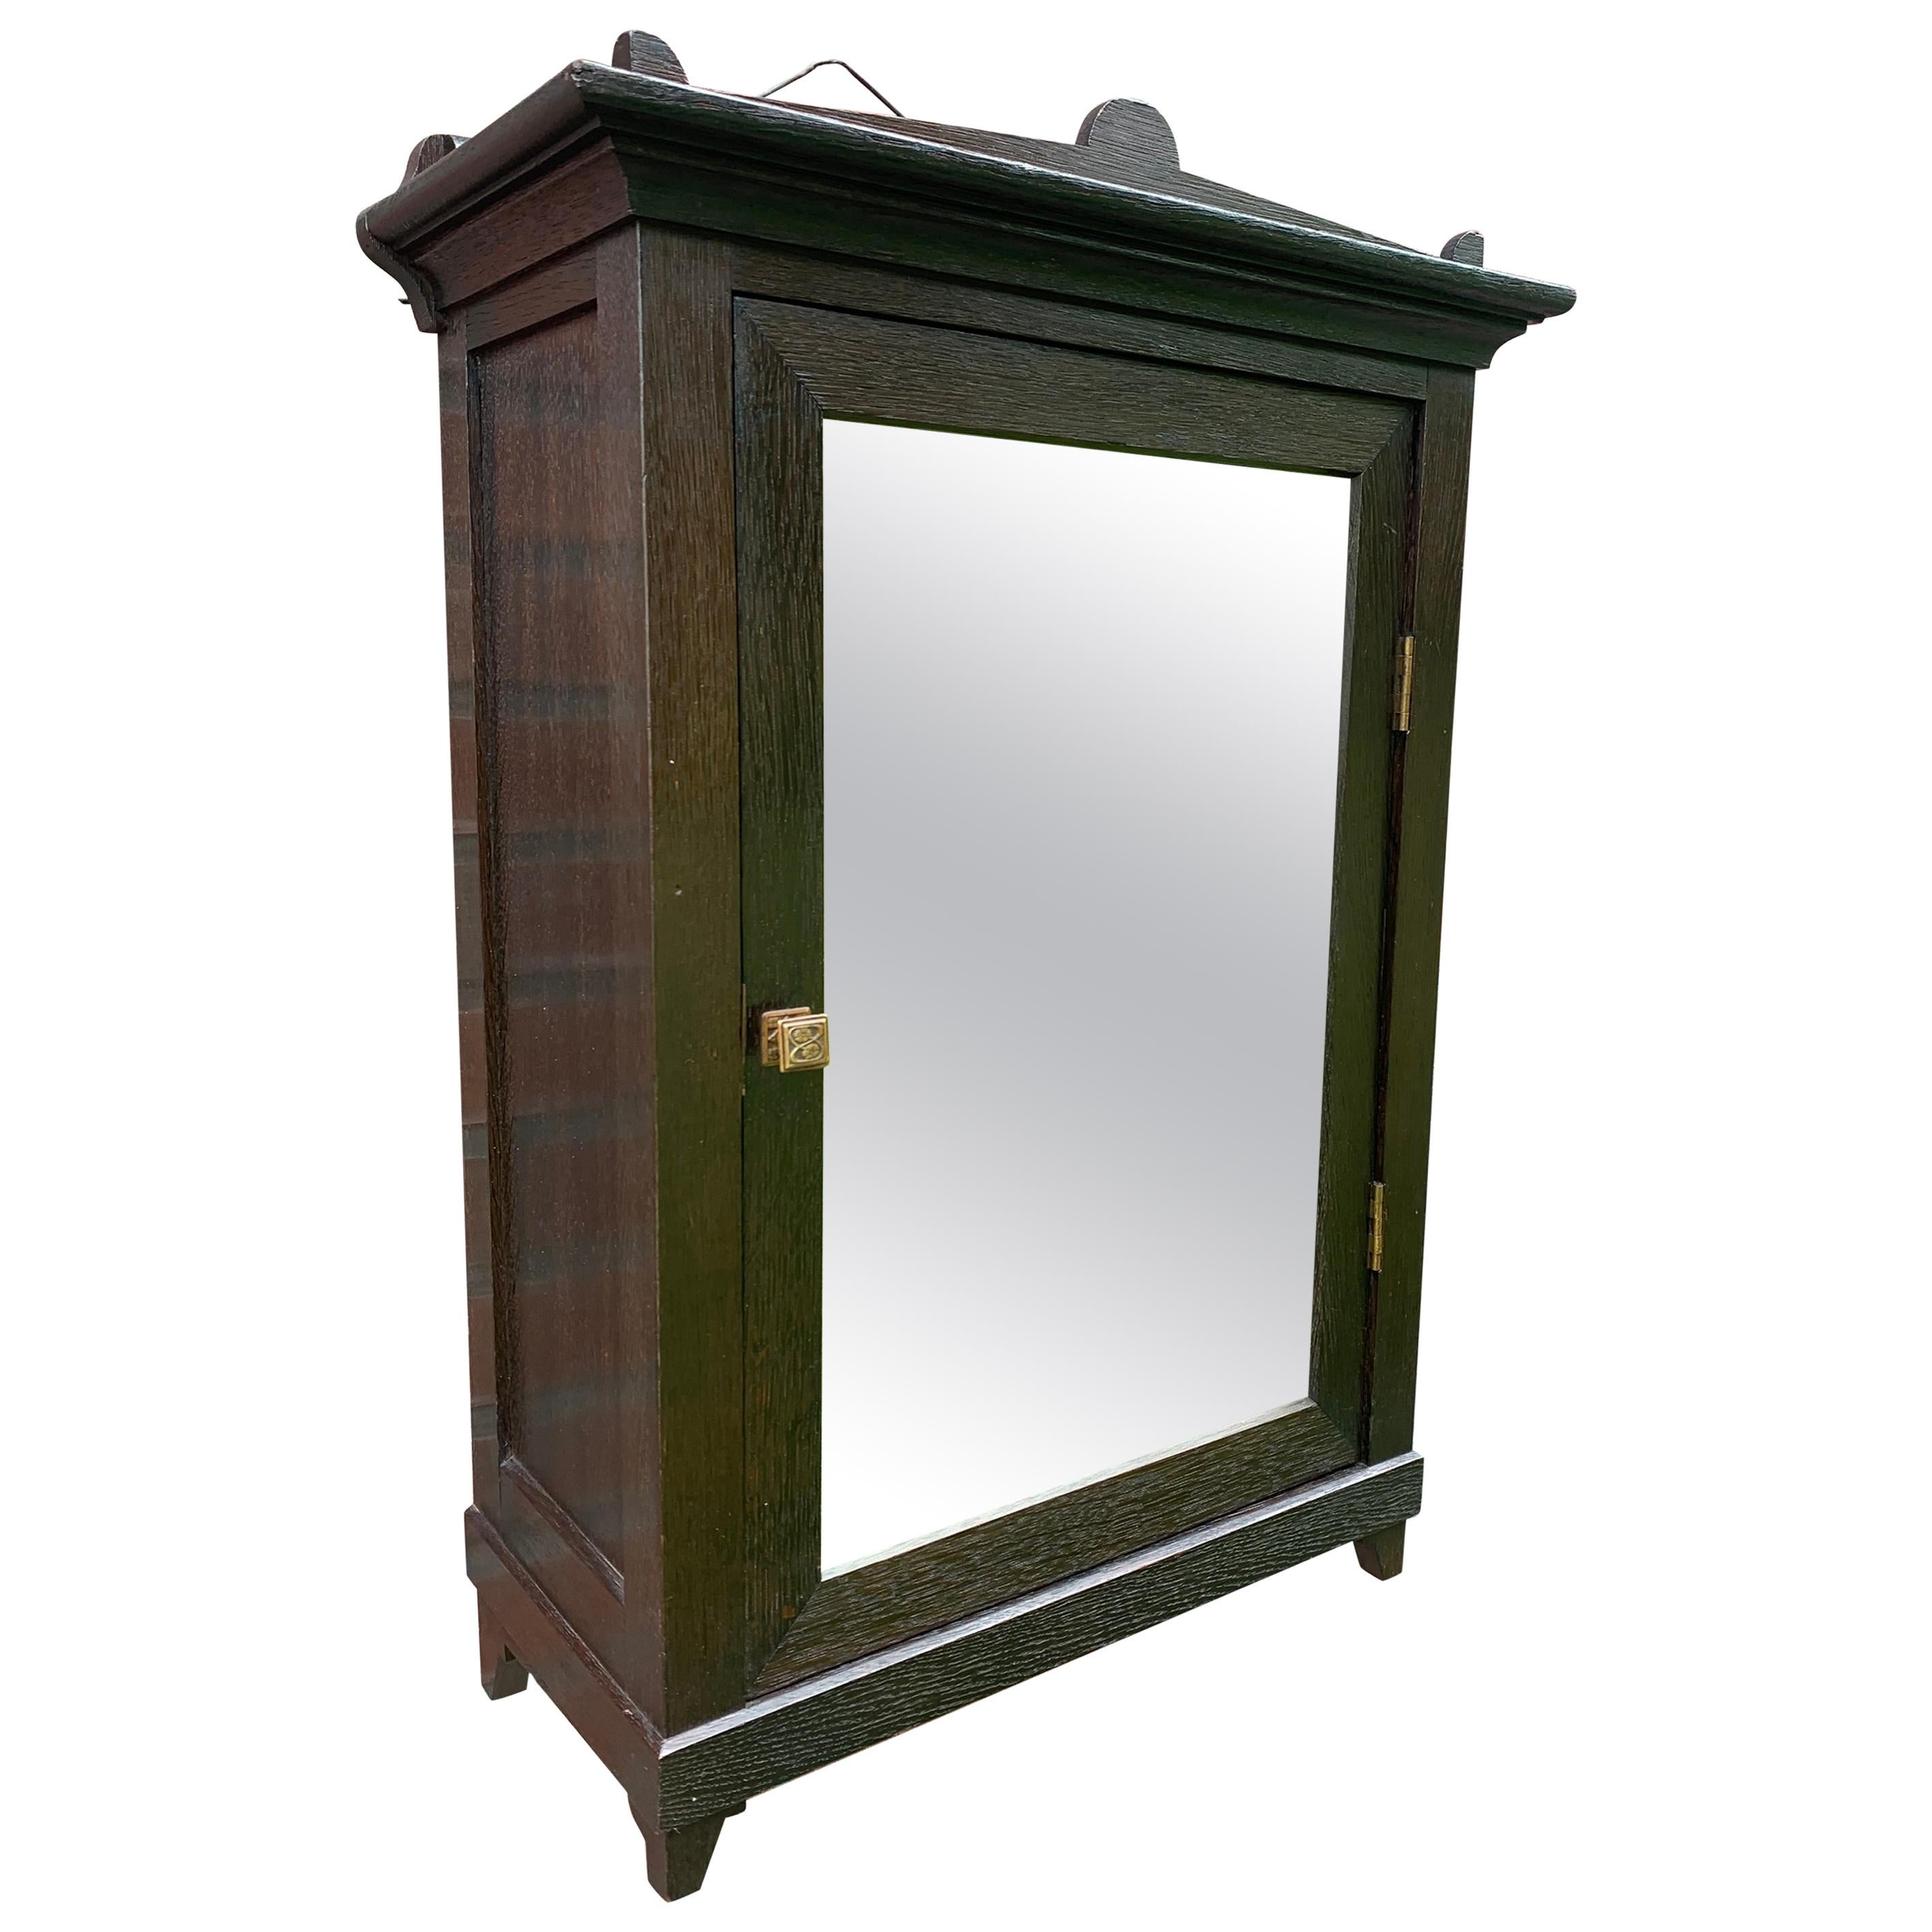 Small Size Arts & Crafts Museum Quality Dark Oak Wall Cabinet with Door Mirror